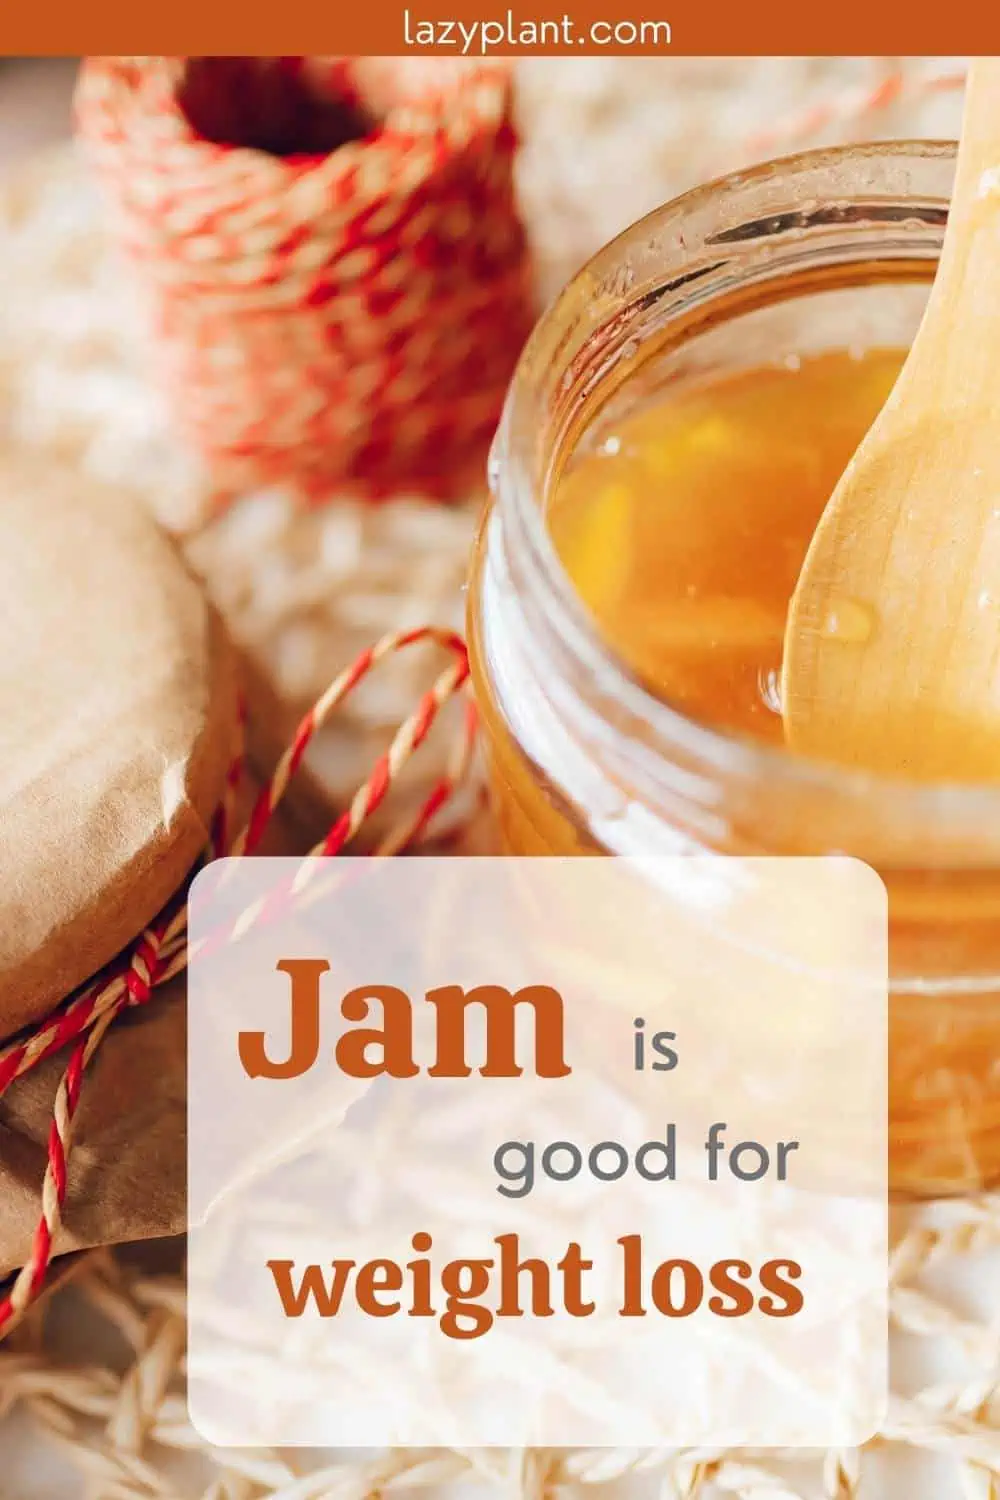 How to eat jam, jelly or marmalade for weight loss? A tablespoon a day is beneficial for burning belly fat.